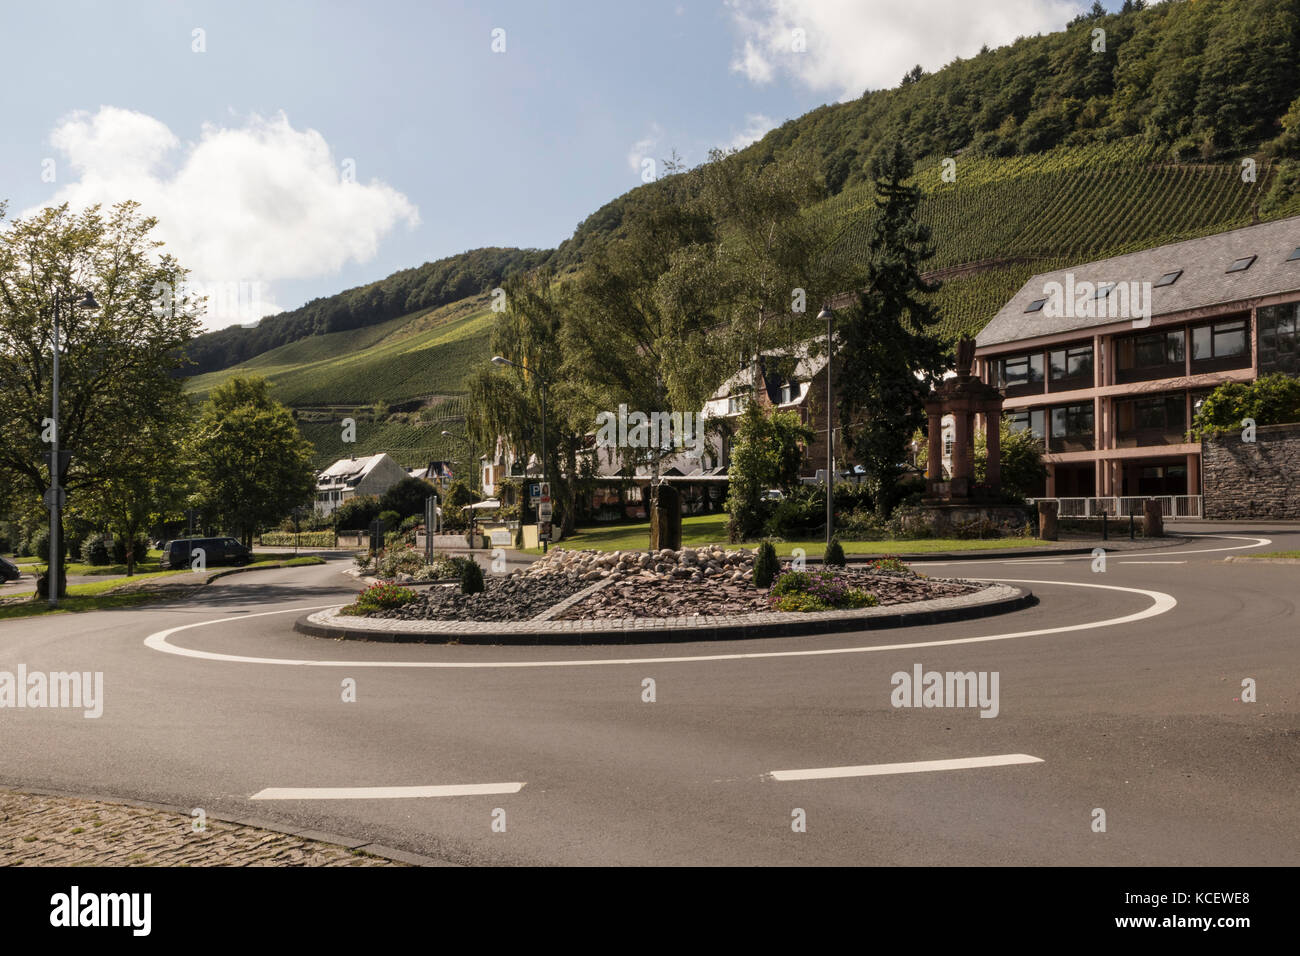 The roundabout and entrance to the  village of Urzig, in the Mosel Valley, Germany Stock Photo